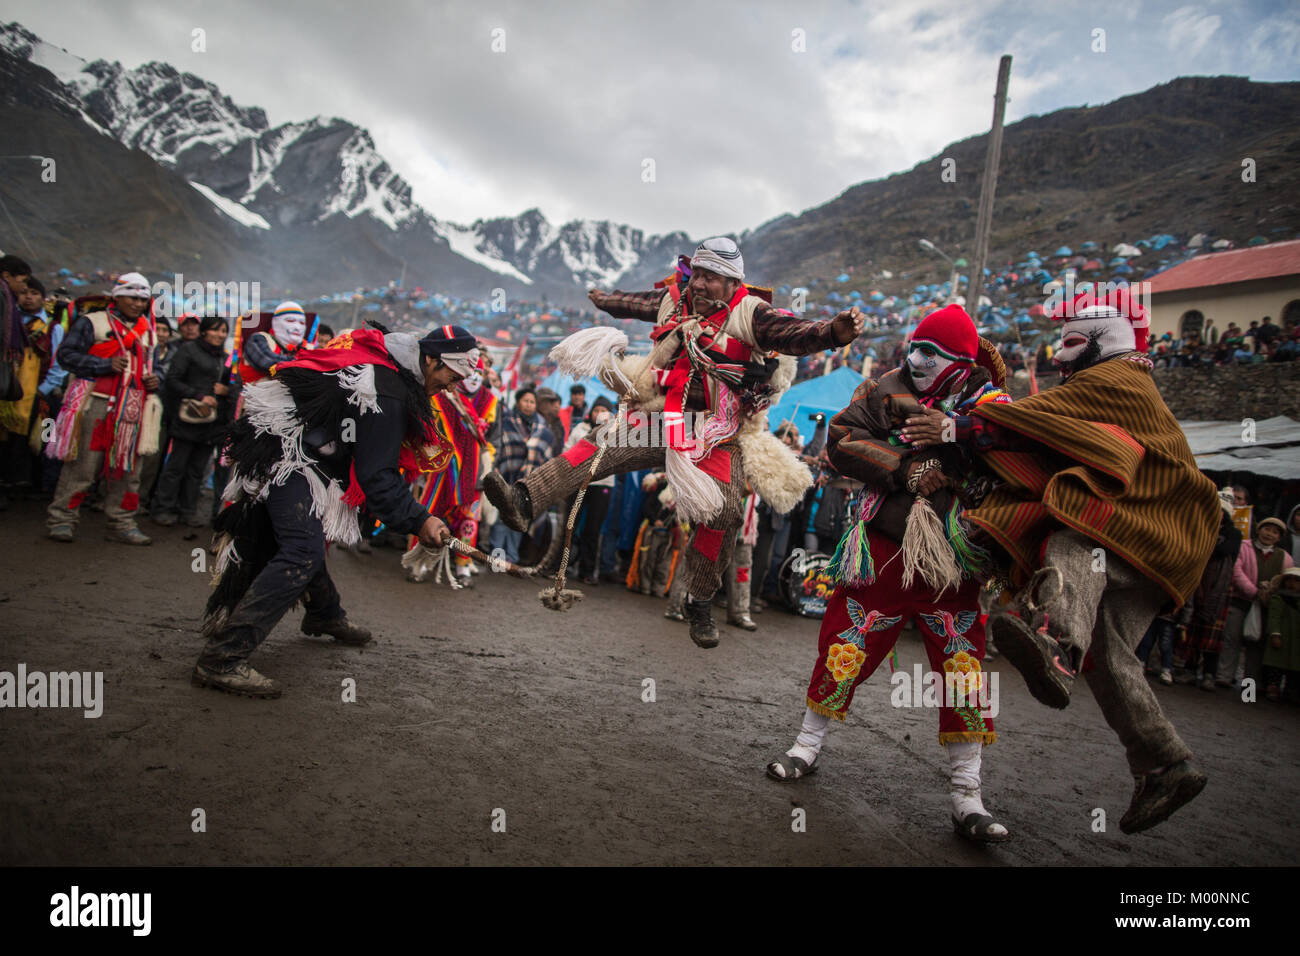 Cusco, Peru. 29th Dec, 2017. The main day in Qoyllurit'i is a true celebration, after having climbed the mountains and having waited for the sunrise in an ancestral ritual, the devotees, dancers and ukukus (guardians of the Lord of Qoyllurit'i) descend to the esplanade where the temple remains In total there are more than 500 dances that participate in this custom, all belonging to the so-called nations, which are groups of parishioners who gather in different parts of the region to make a pilgrimage to the sanctuary.Quyllur Rit'i or Star Snow Festival is a spiritual and religious festiv Stock Photo